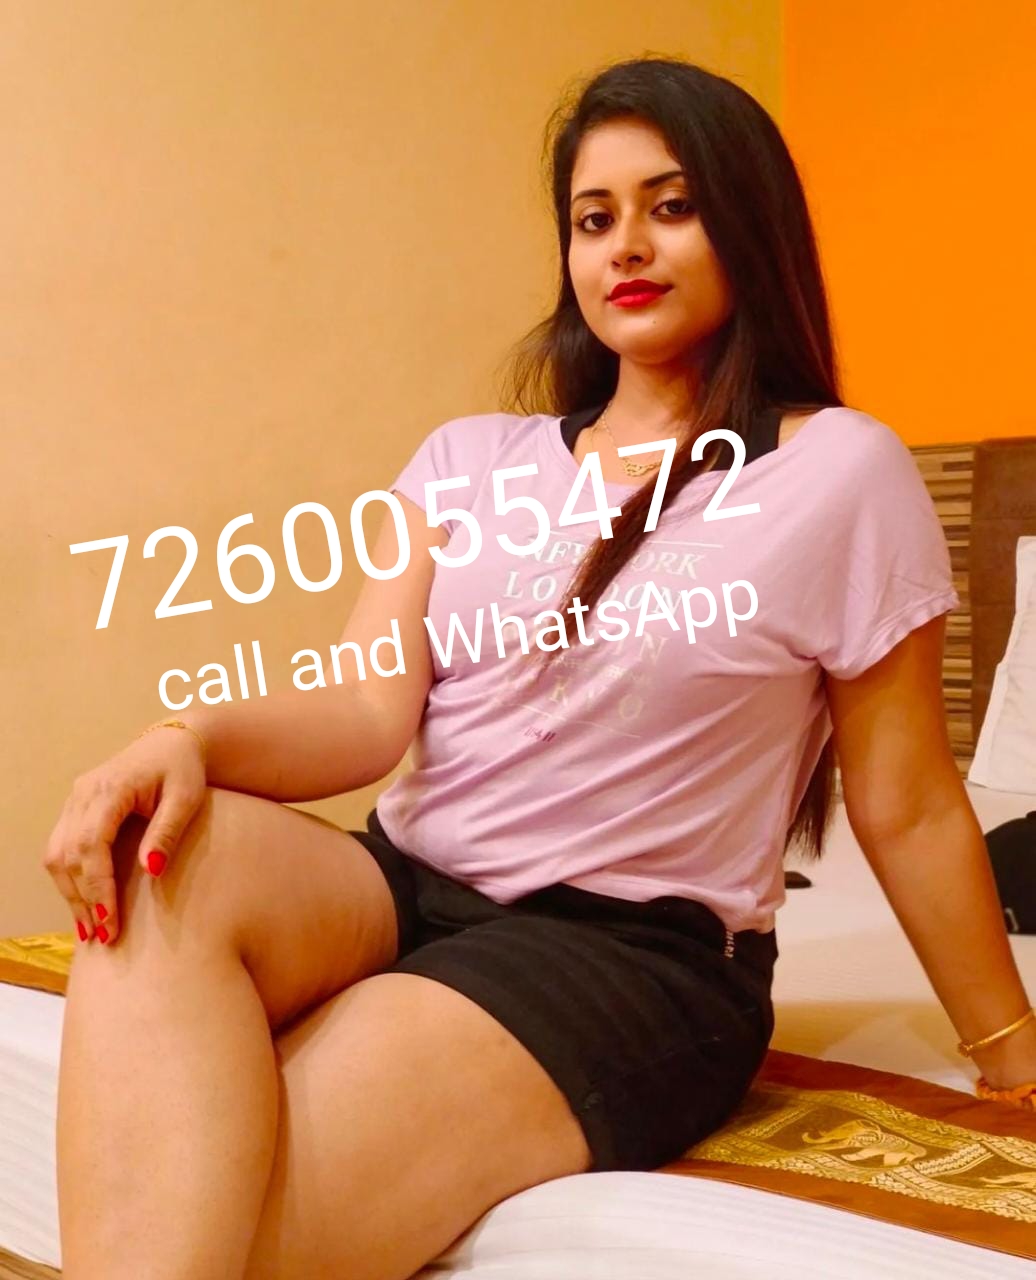 Low price %⭐⭐⭐ genuine sexy VIP call girls are provided saftj